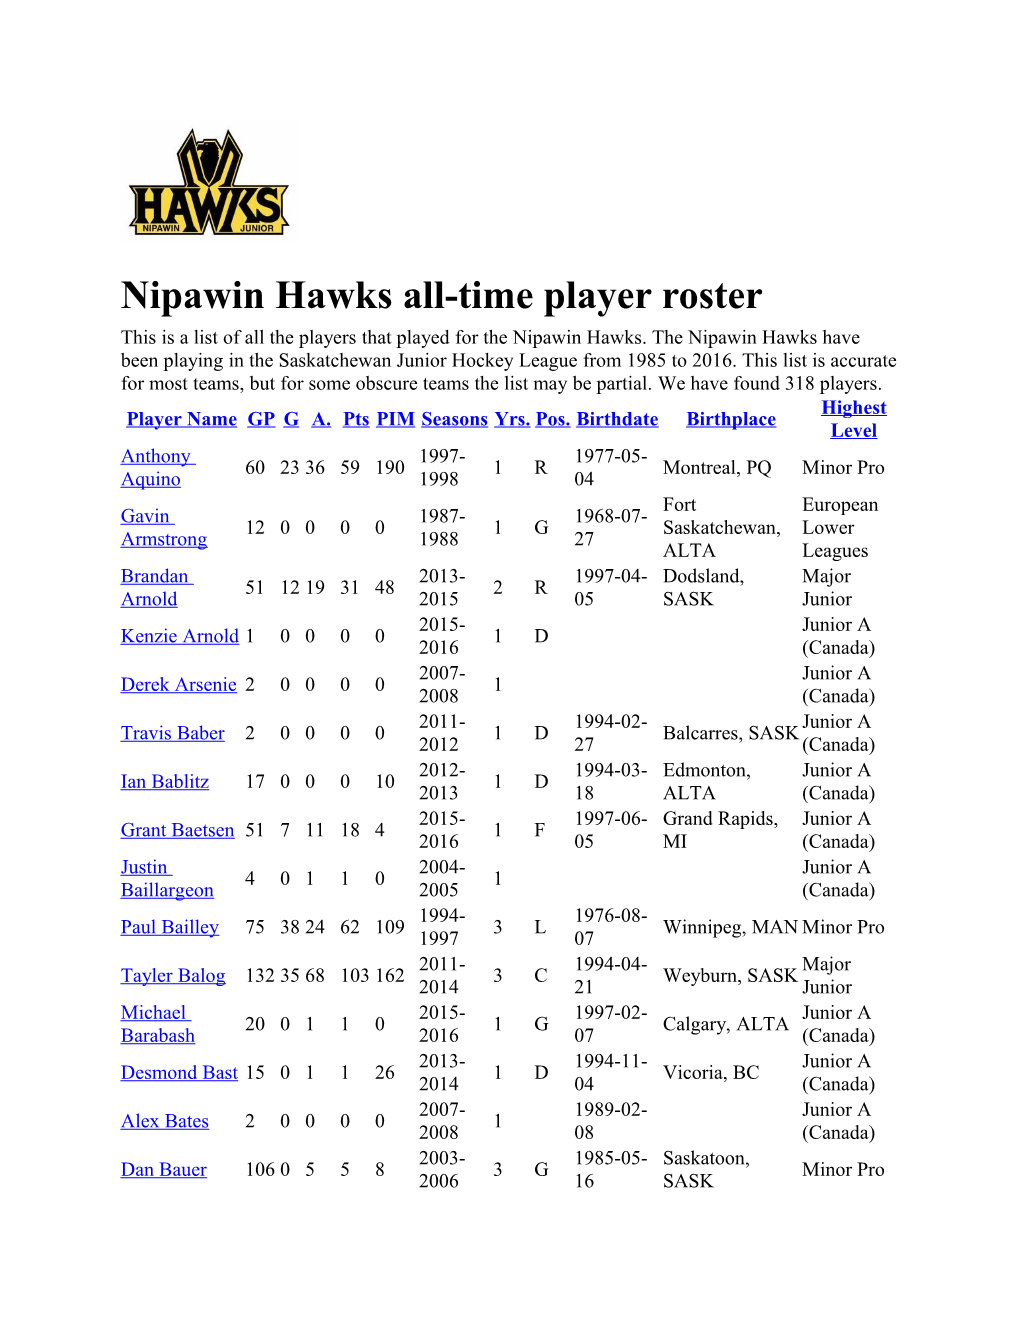 Nipawin Hawks All-Time Player Roster